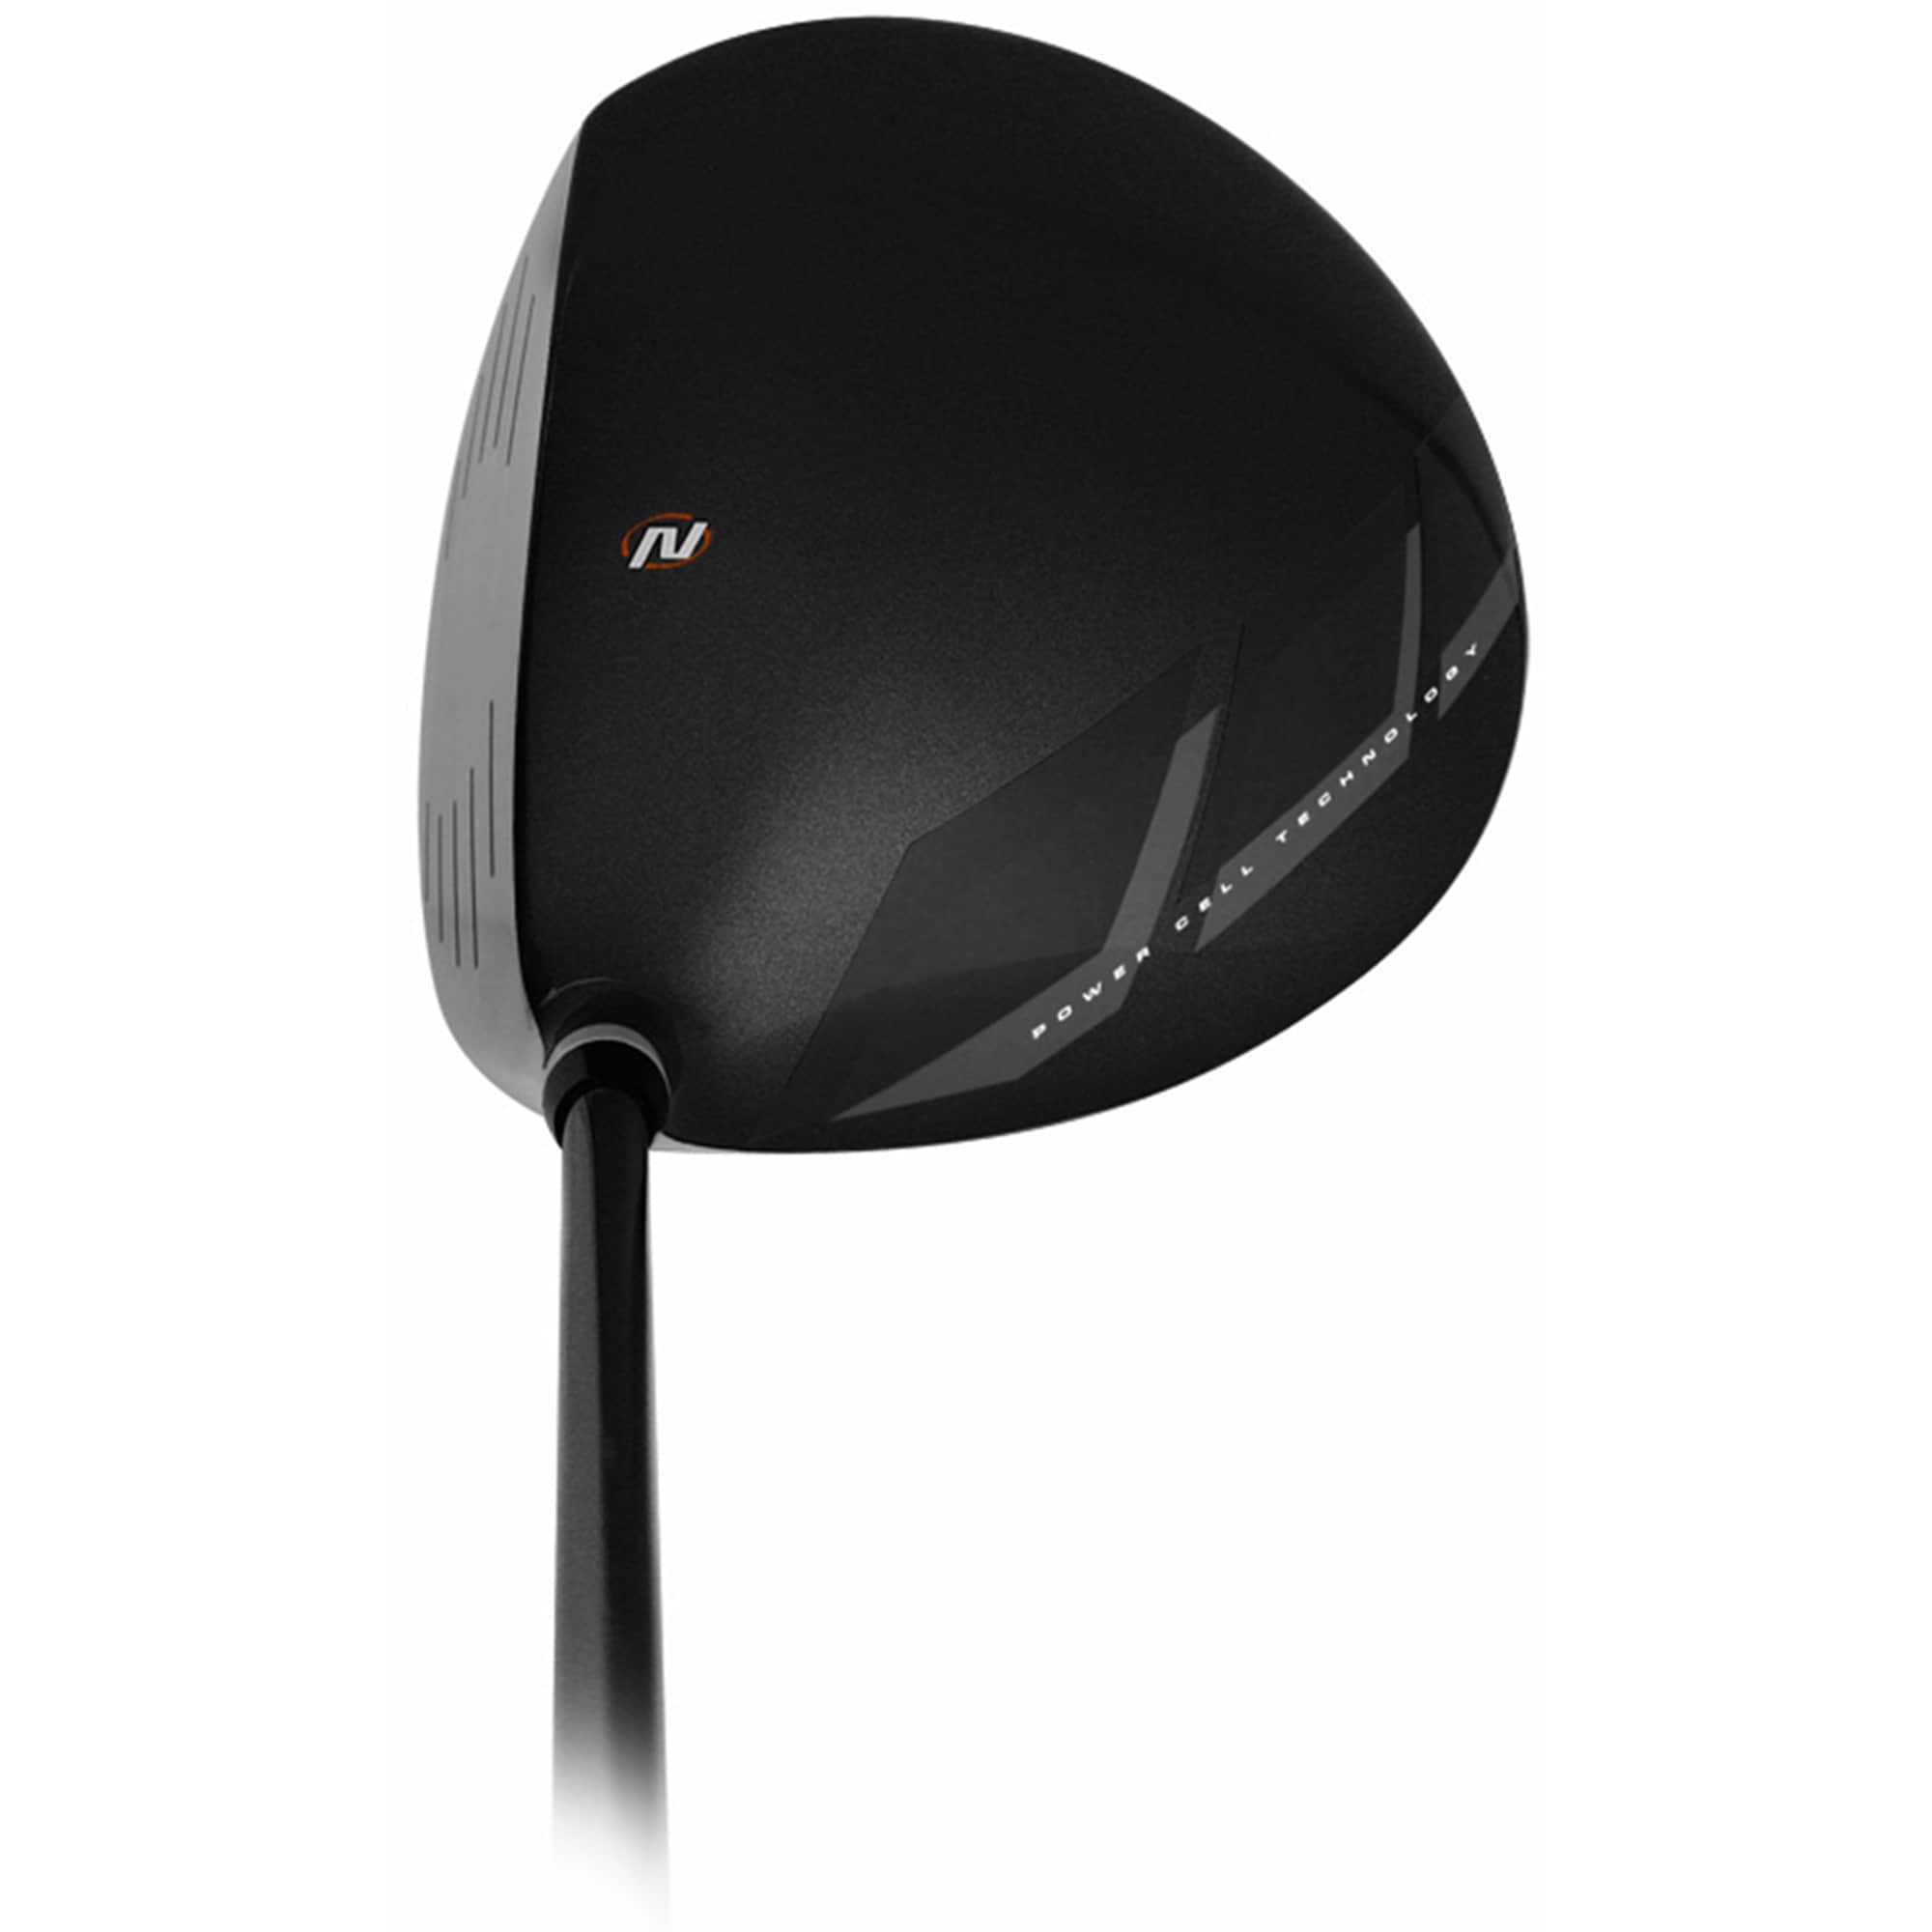 Nextt Solstice  Matt Black Driver (Black/copperRight/left handed RightLoft degree 10.5Shaft options GraphiteCover Custom Materials Graphite / Steel / RubberWeight 2Dimensions 6x6x46Set includes Driver with Custom cover )